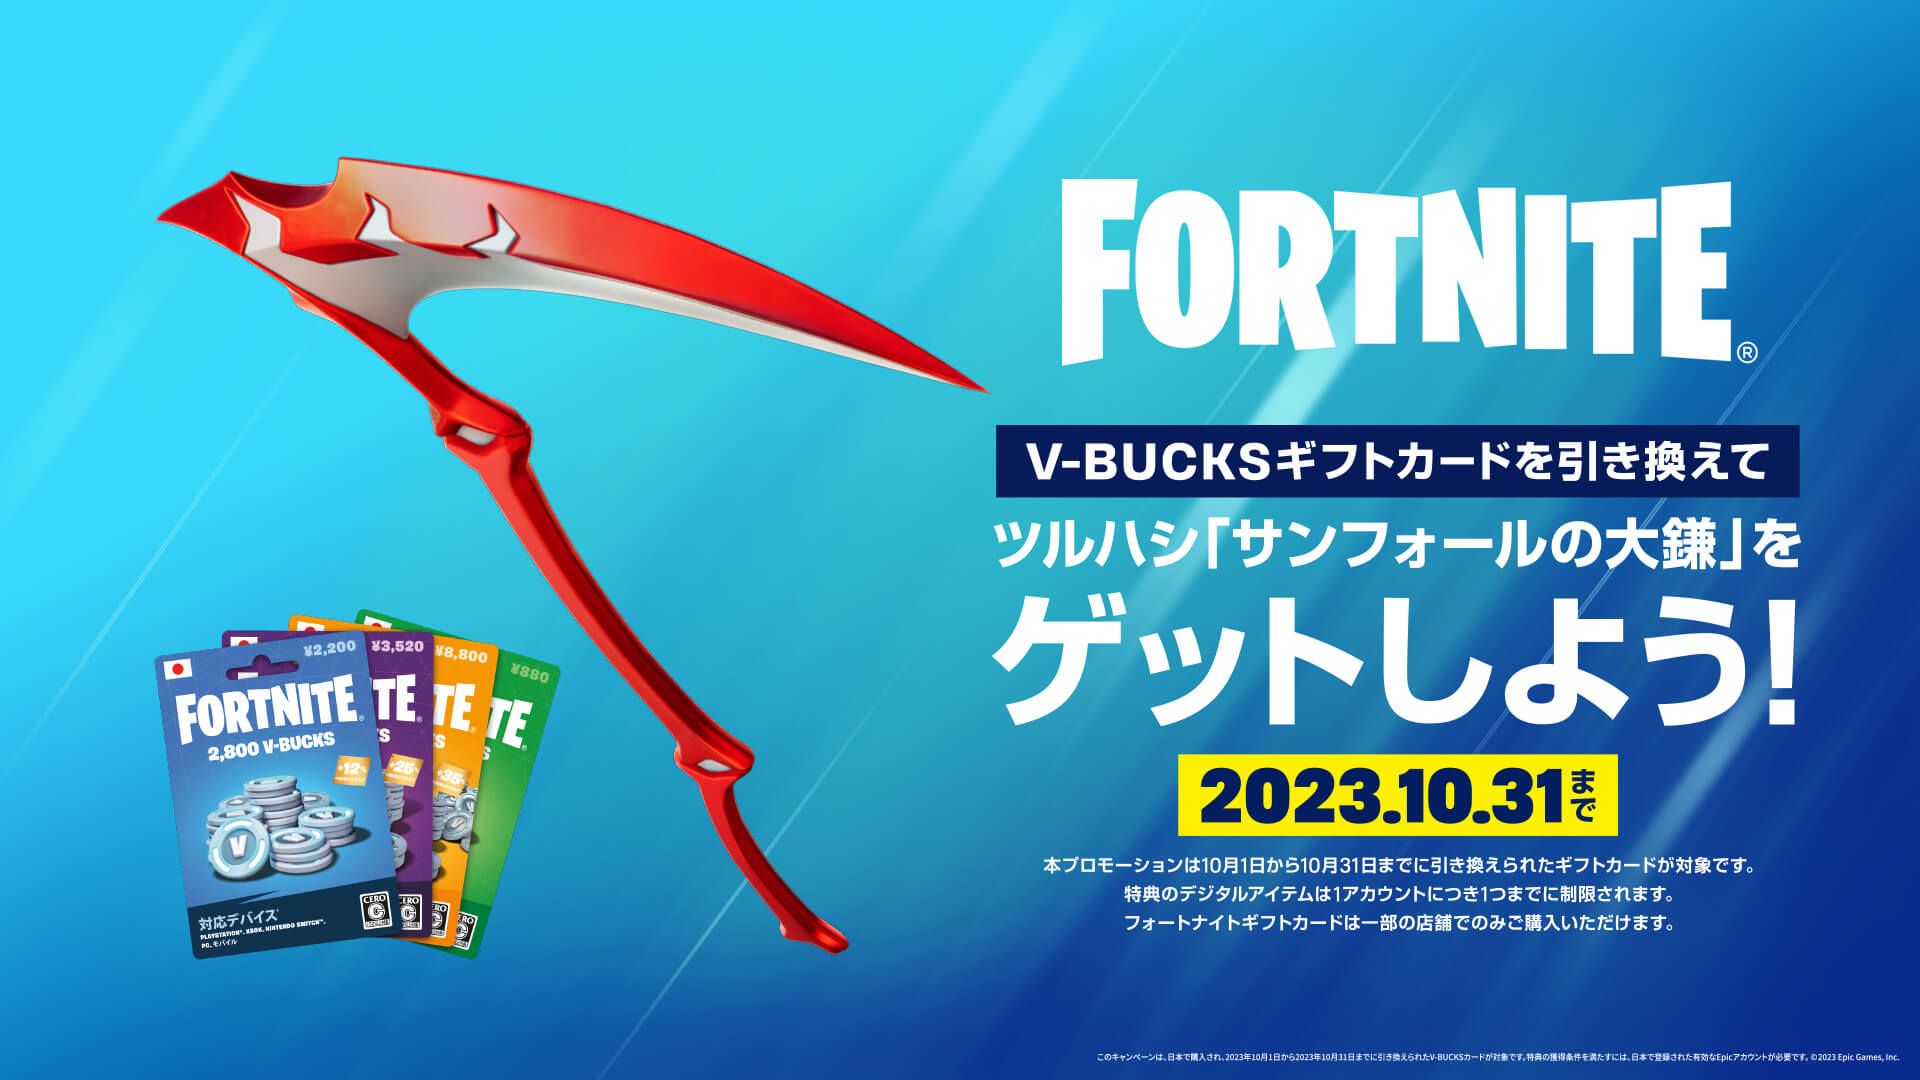 FREE V-BUCK PRESENT for EVERYONE! 